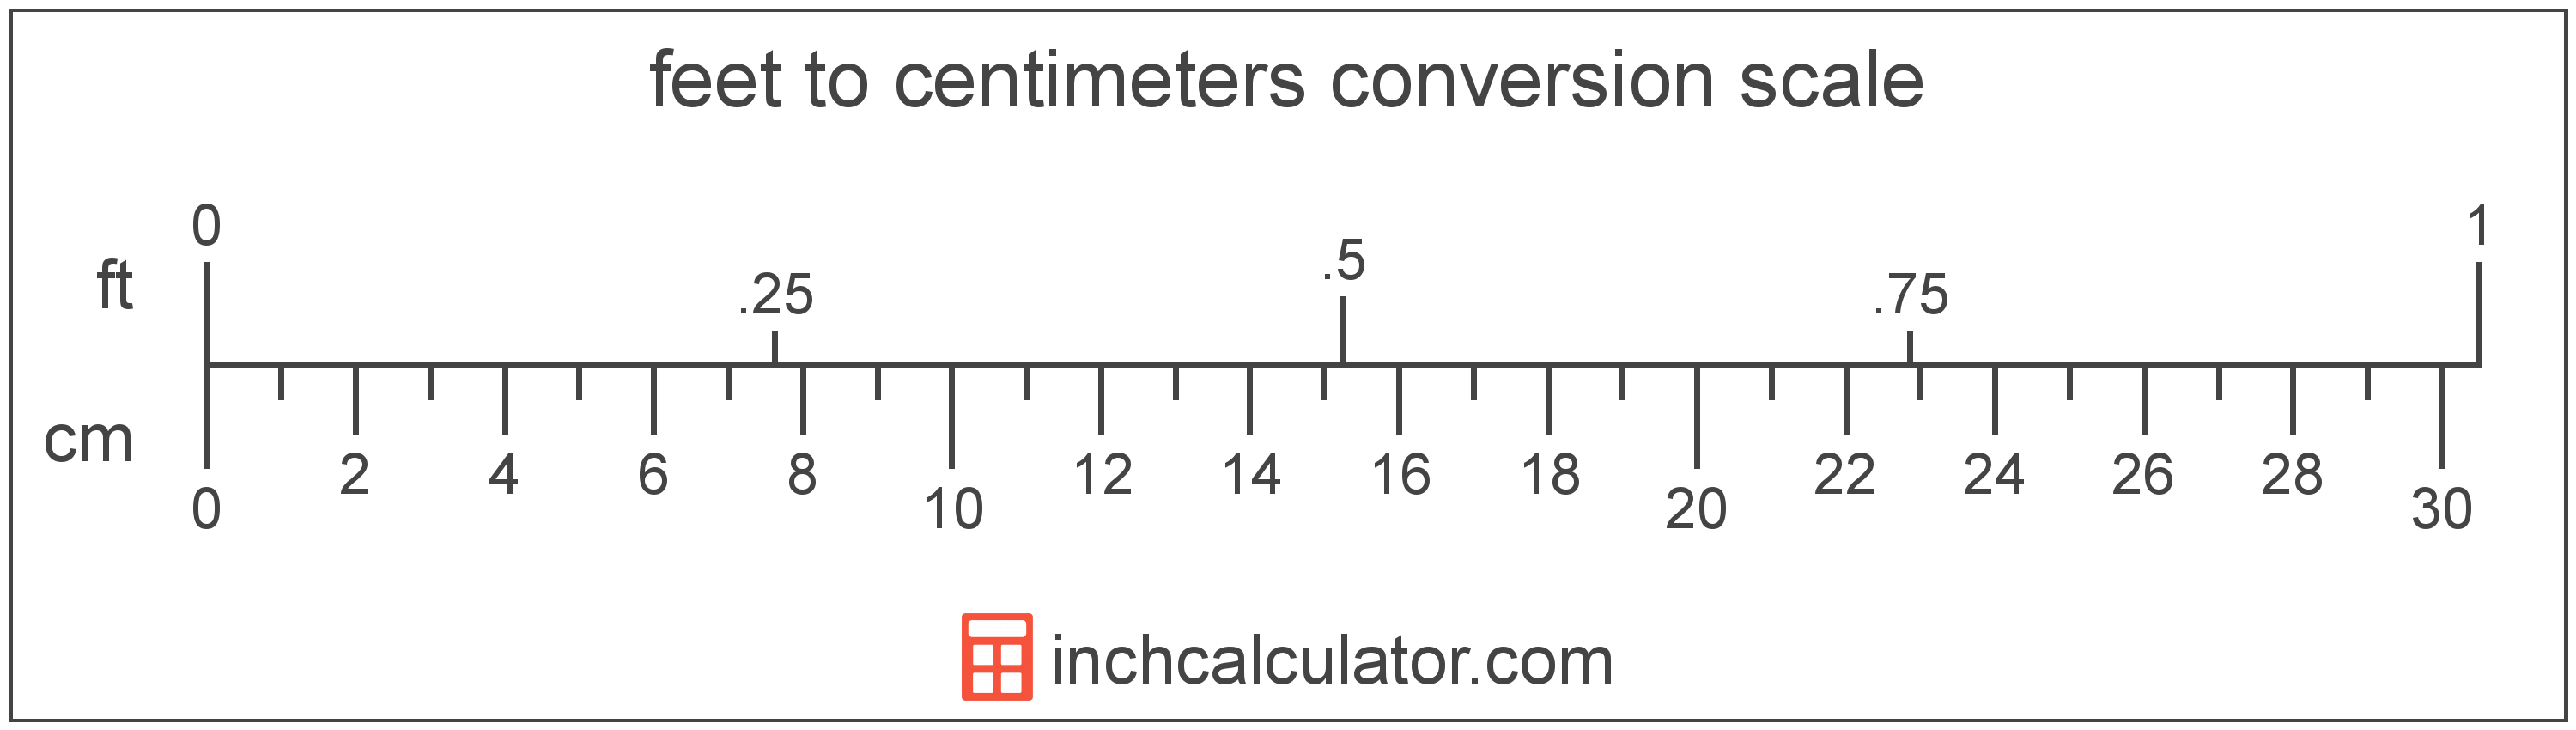 theater Permanent density Feet to cm Conversion (ft to cm) - Inch Calculator